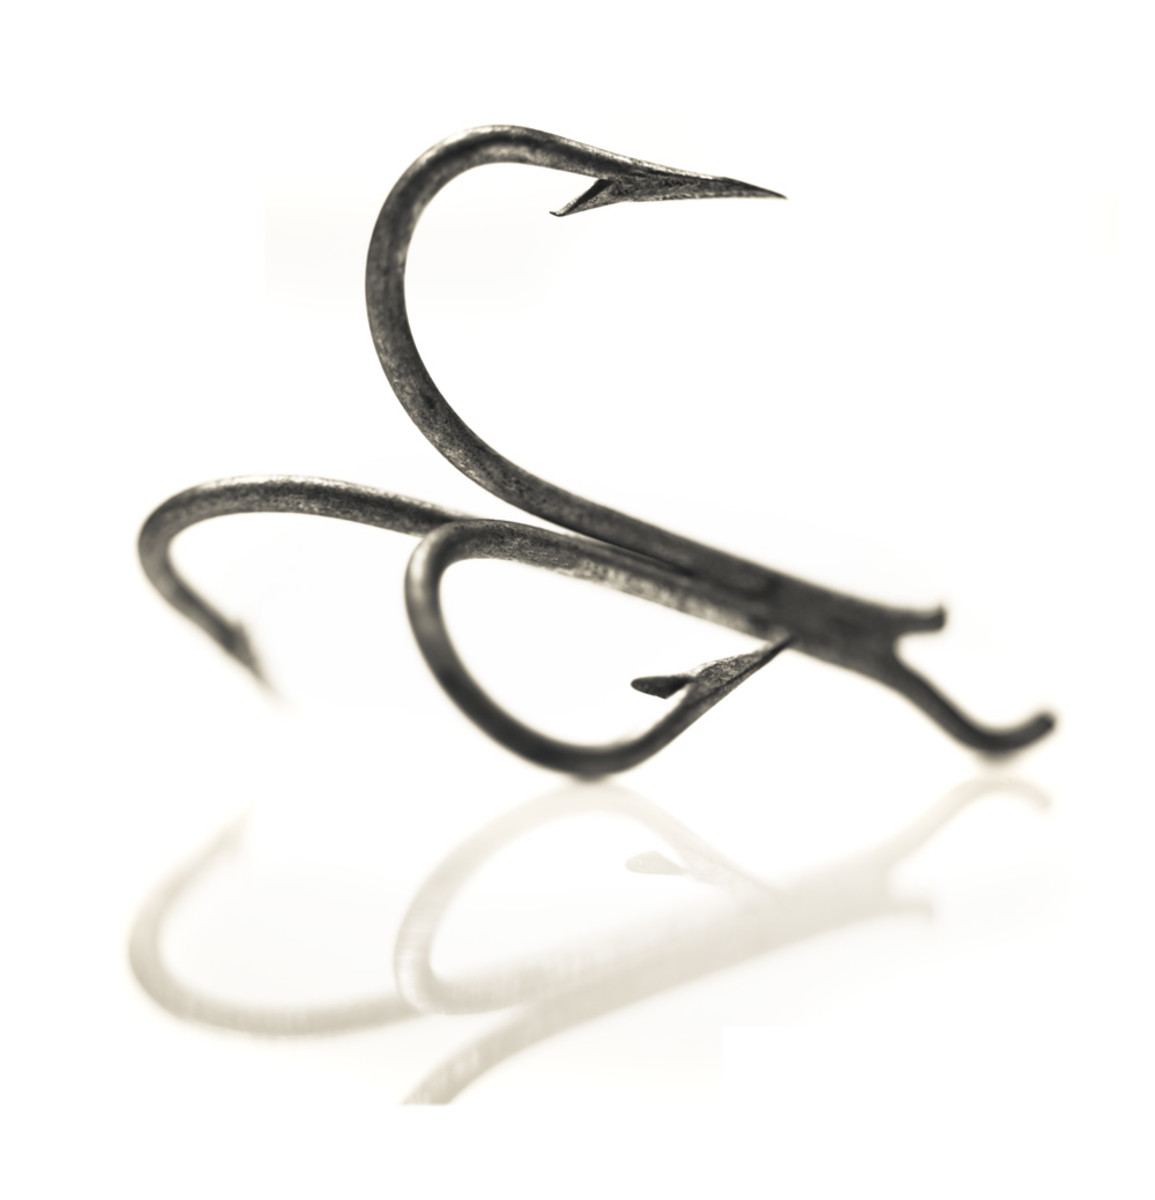 How did they do that? Try twisting a 4/0 Mustad treble hook into this shape with a pair of pliers.